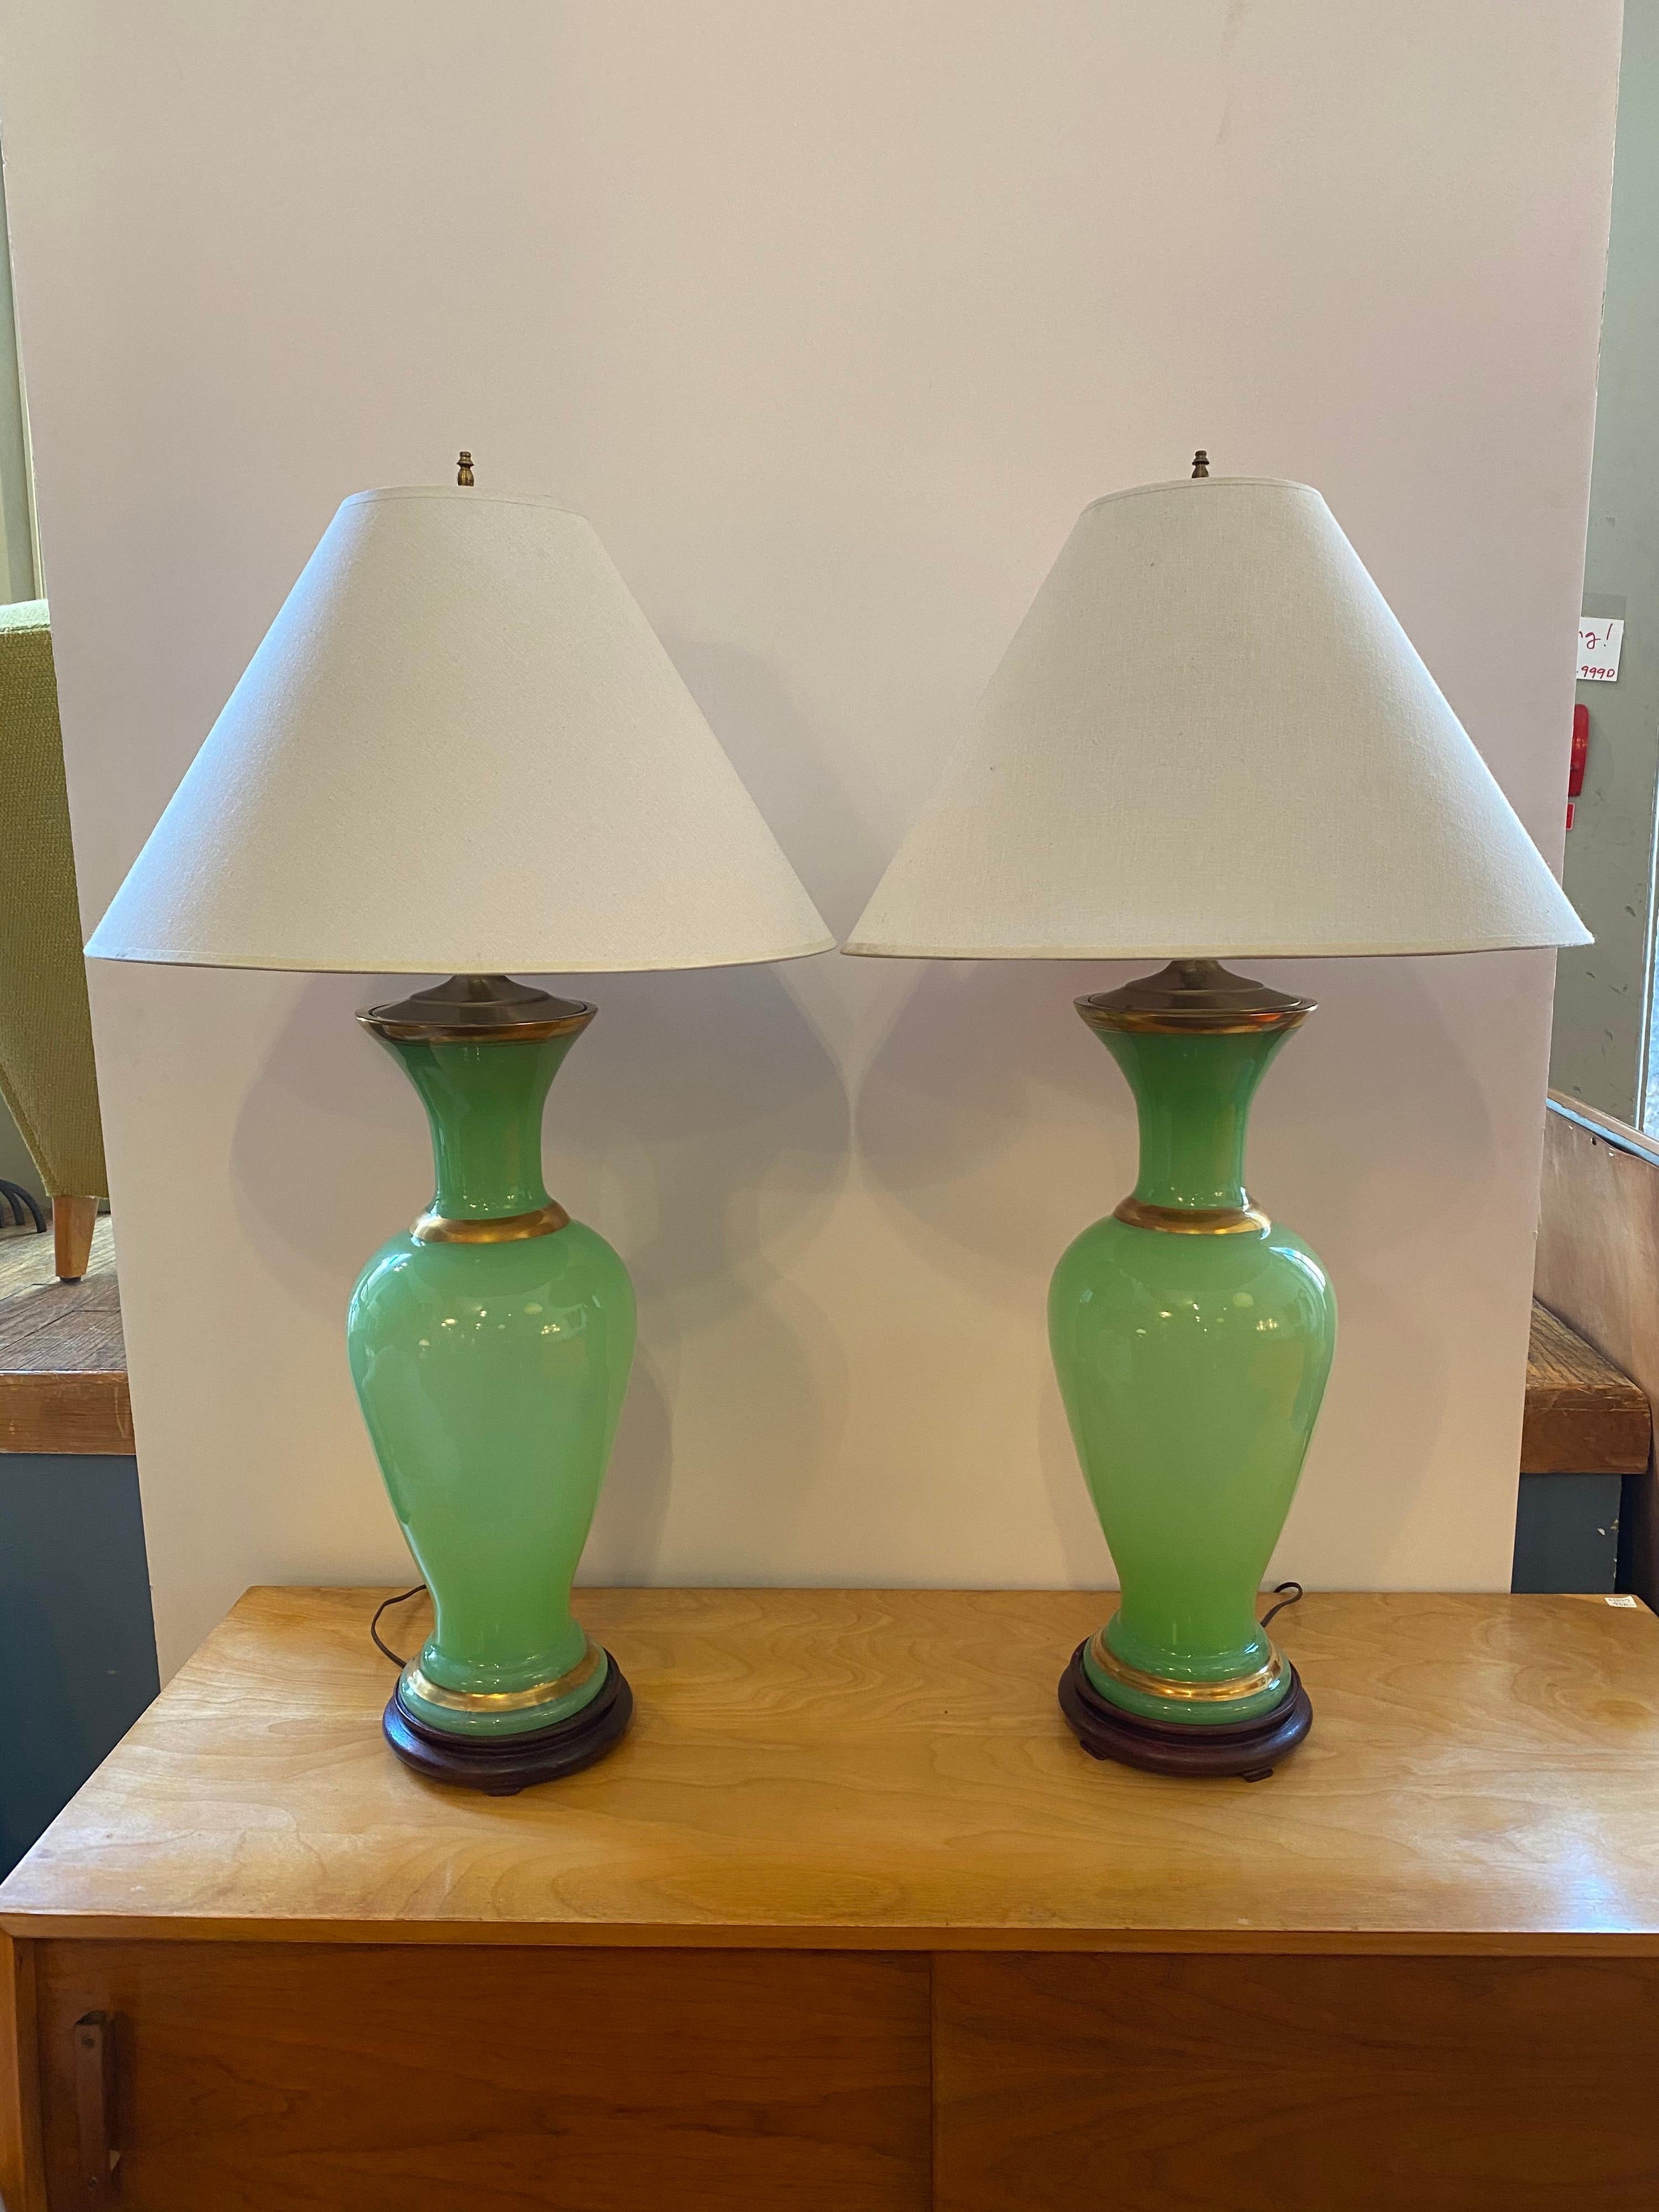 Emerald blown glass table lamps. Beautiful color that glows when the lamp is turned on! Gold accent bands add to the design. Lamps sit on small wood bases. Recently rewired and ready to go! Green glass bodies measure 22